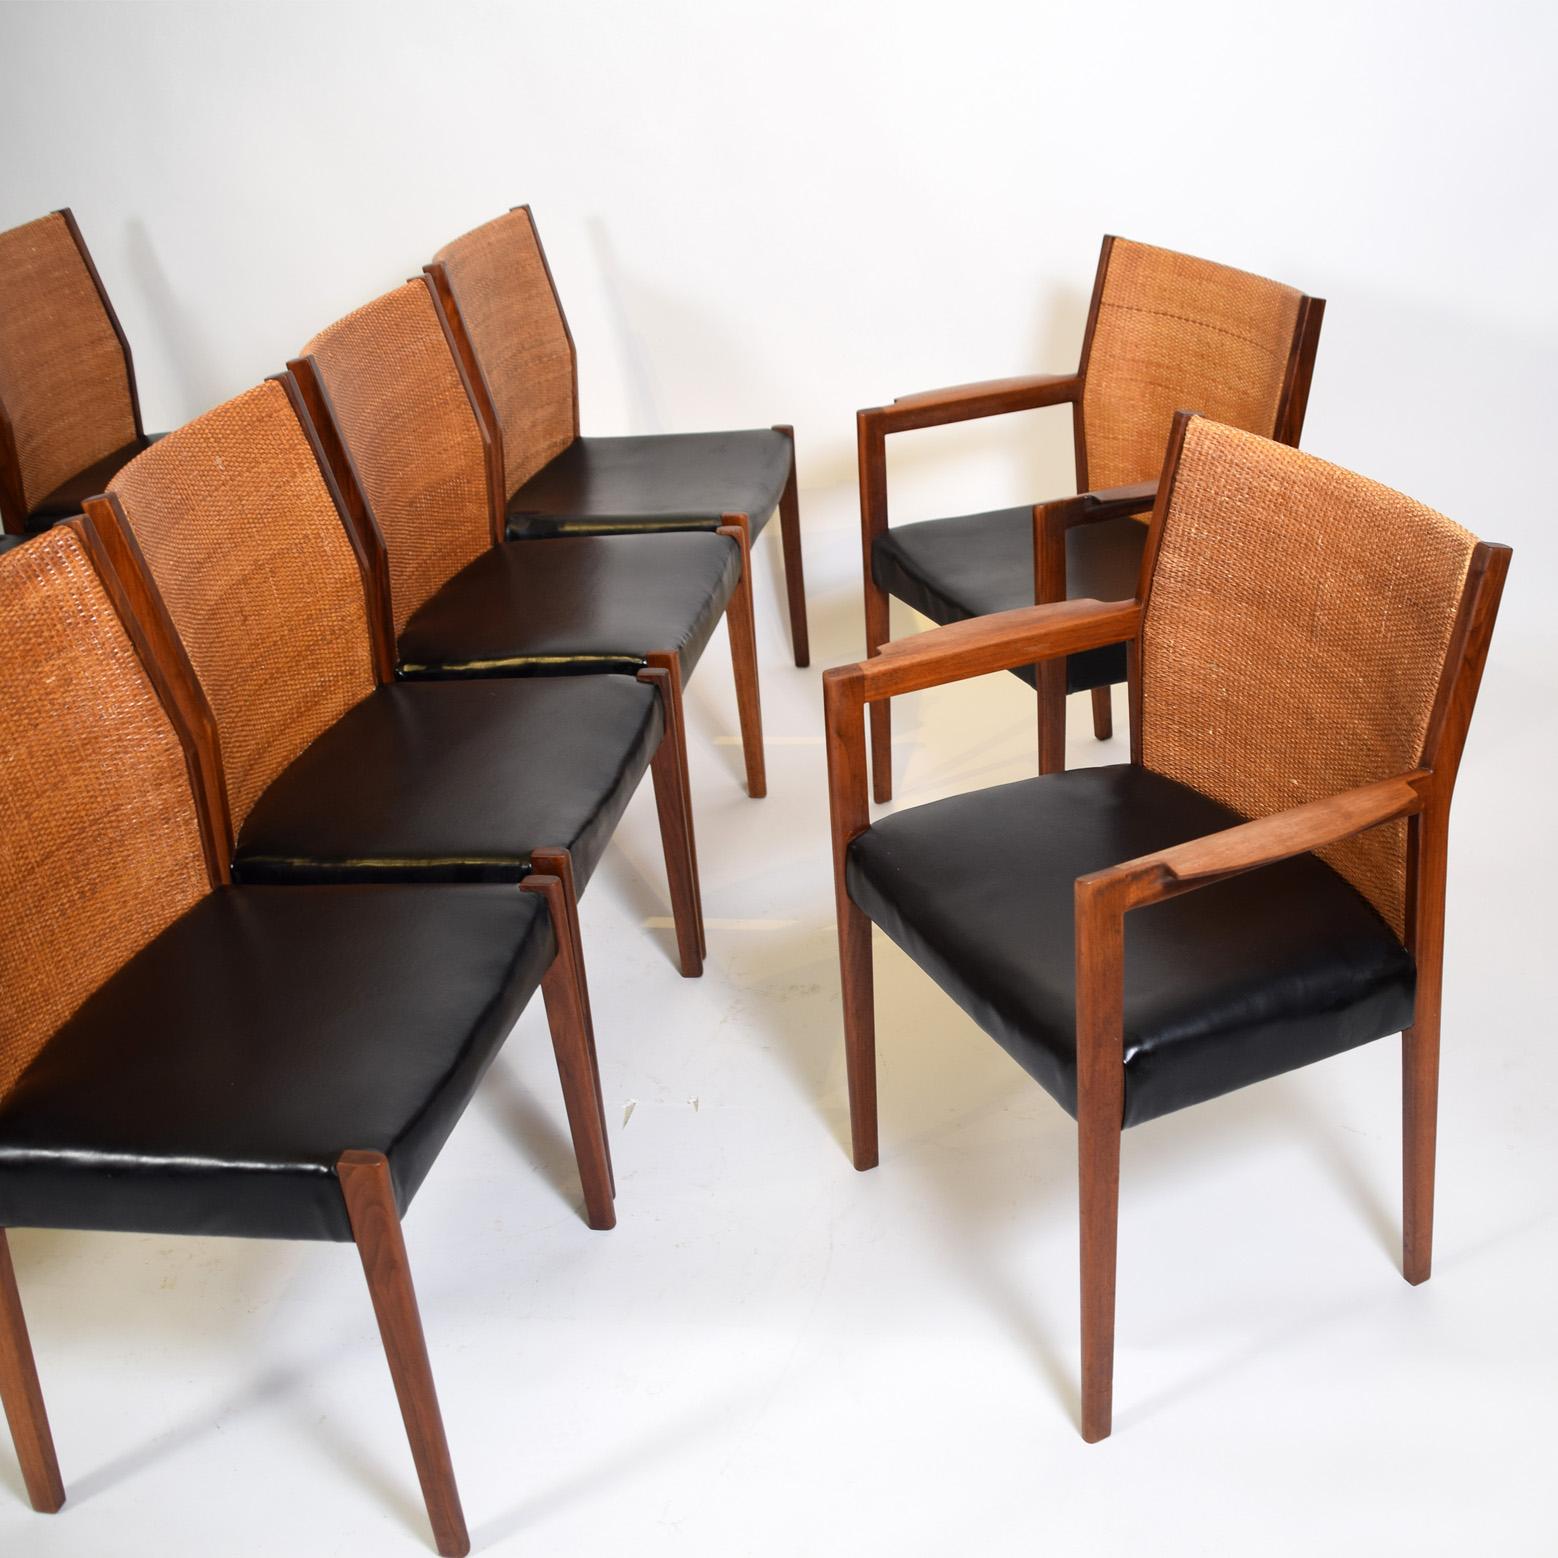 Walnut Set of 10 Jens Risom Dining Chairs for Risom Design 1960's